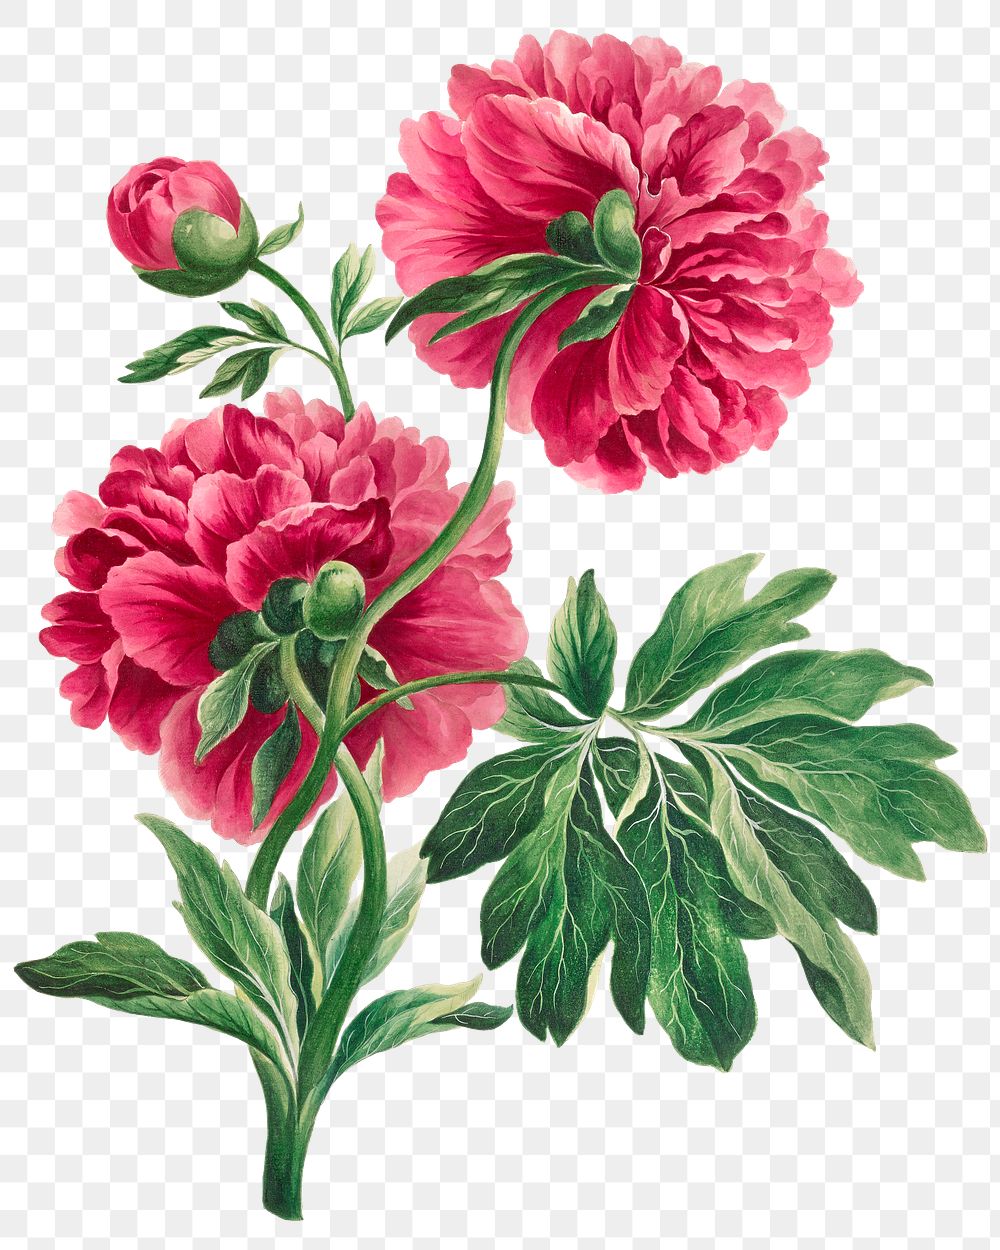 Pink peony png floral design element, remixed from artworks by John Edwards